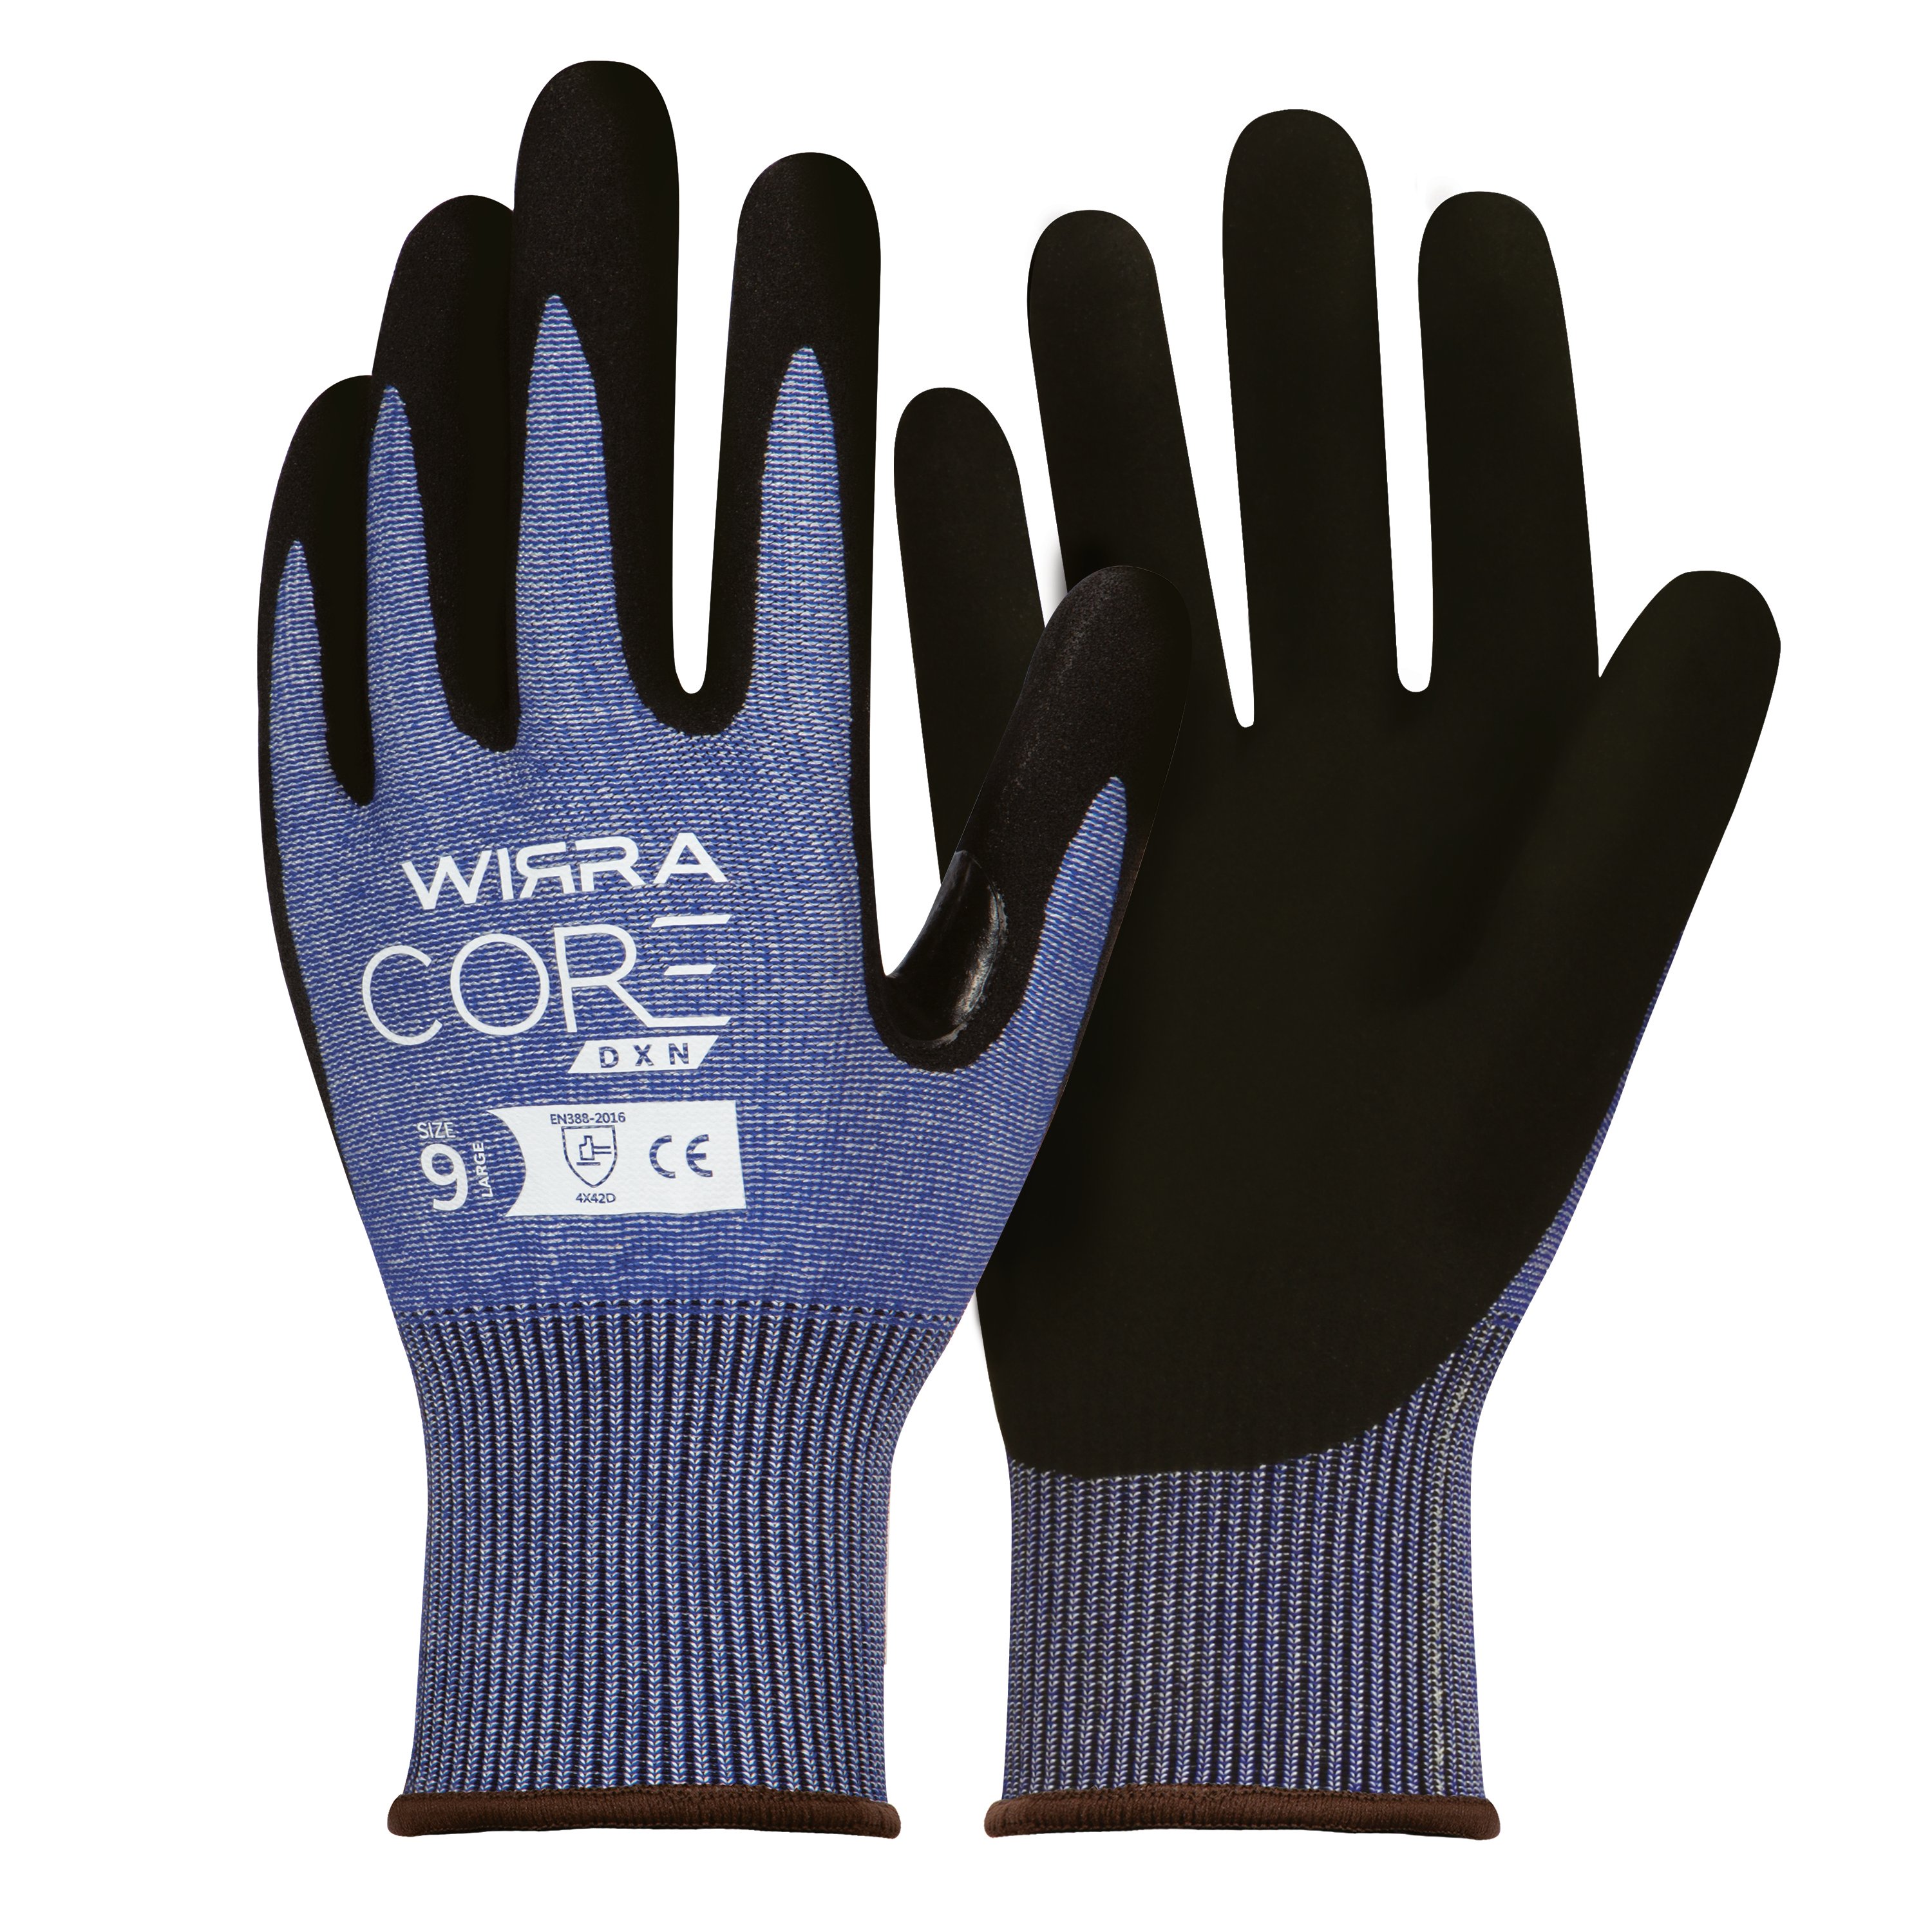 Core DXN Cut D Gloves Nitrile Coated